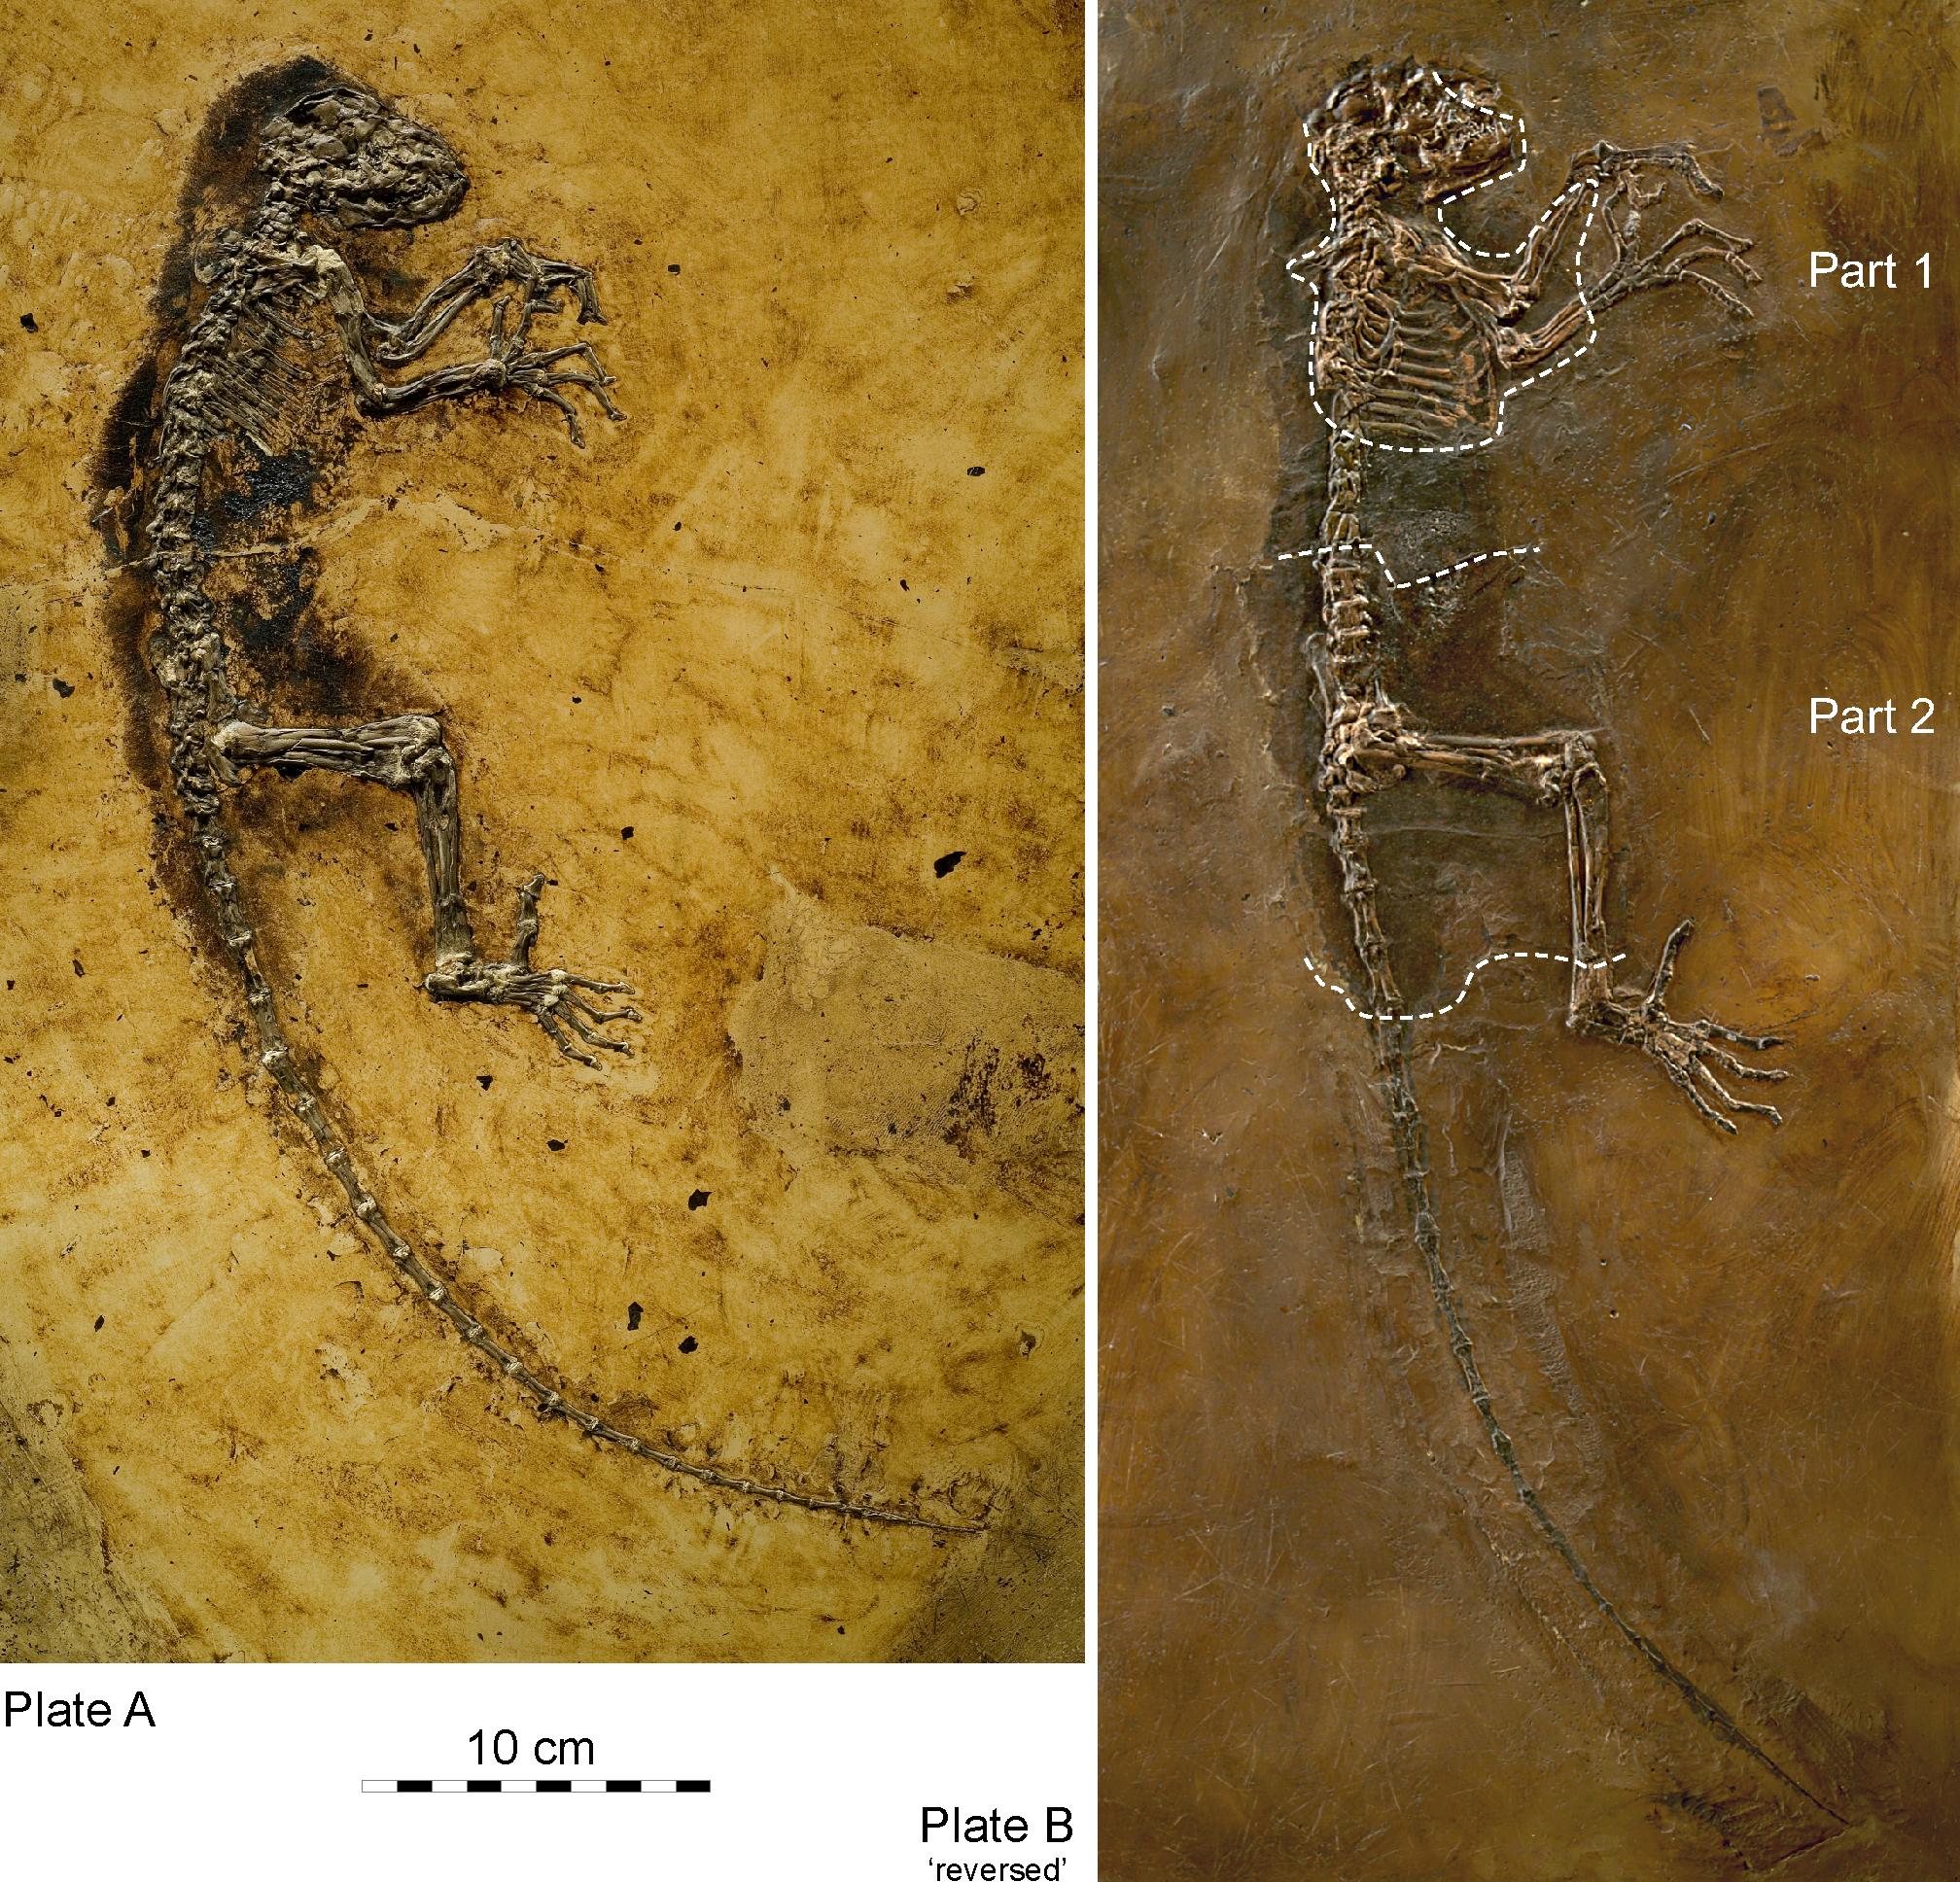 Darwinius masillae. The slab on the left is Plate A and the slab on the right is Plate B. The parts of the skeleton in B that are outside of the dashed lines were fabricated.